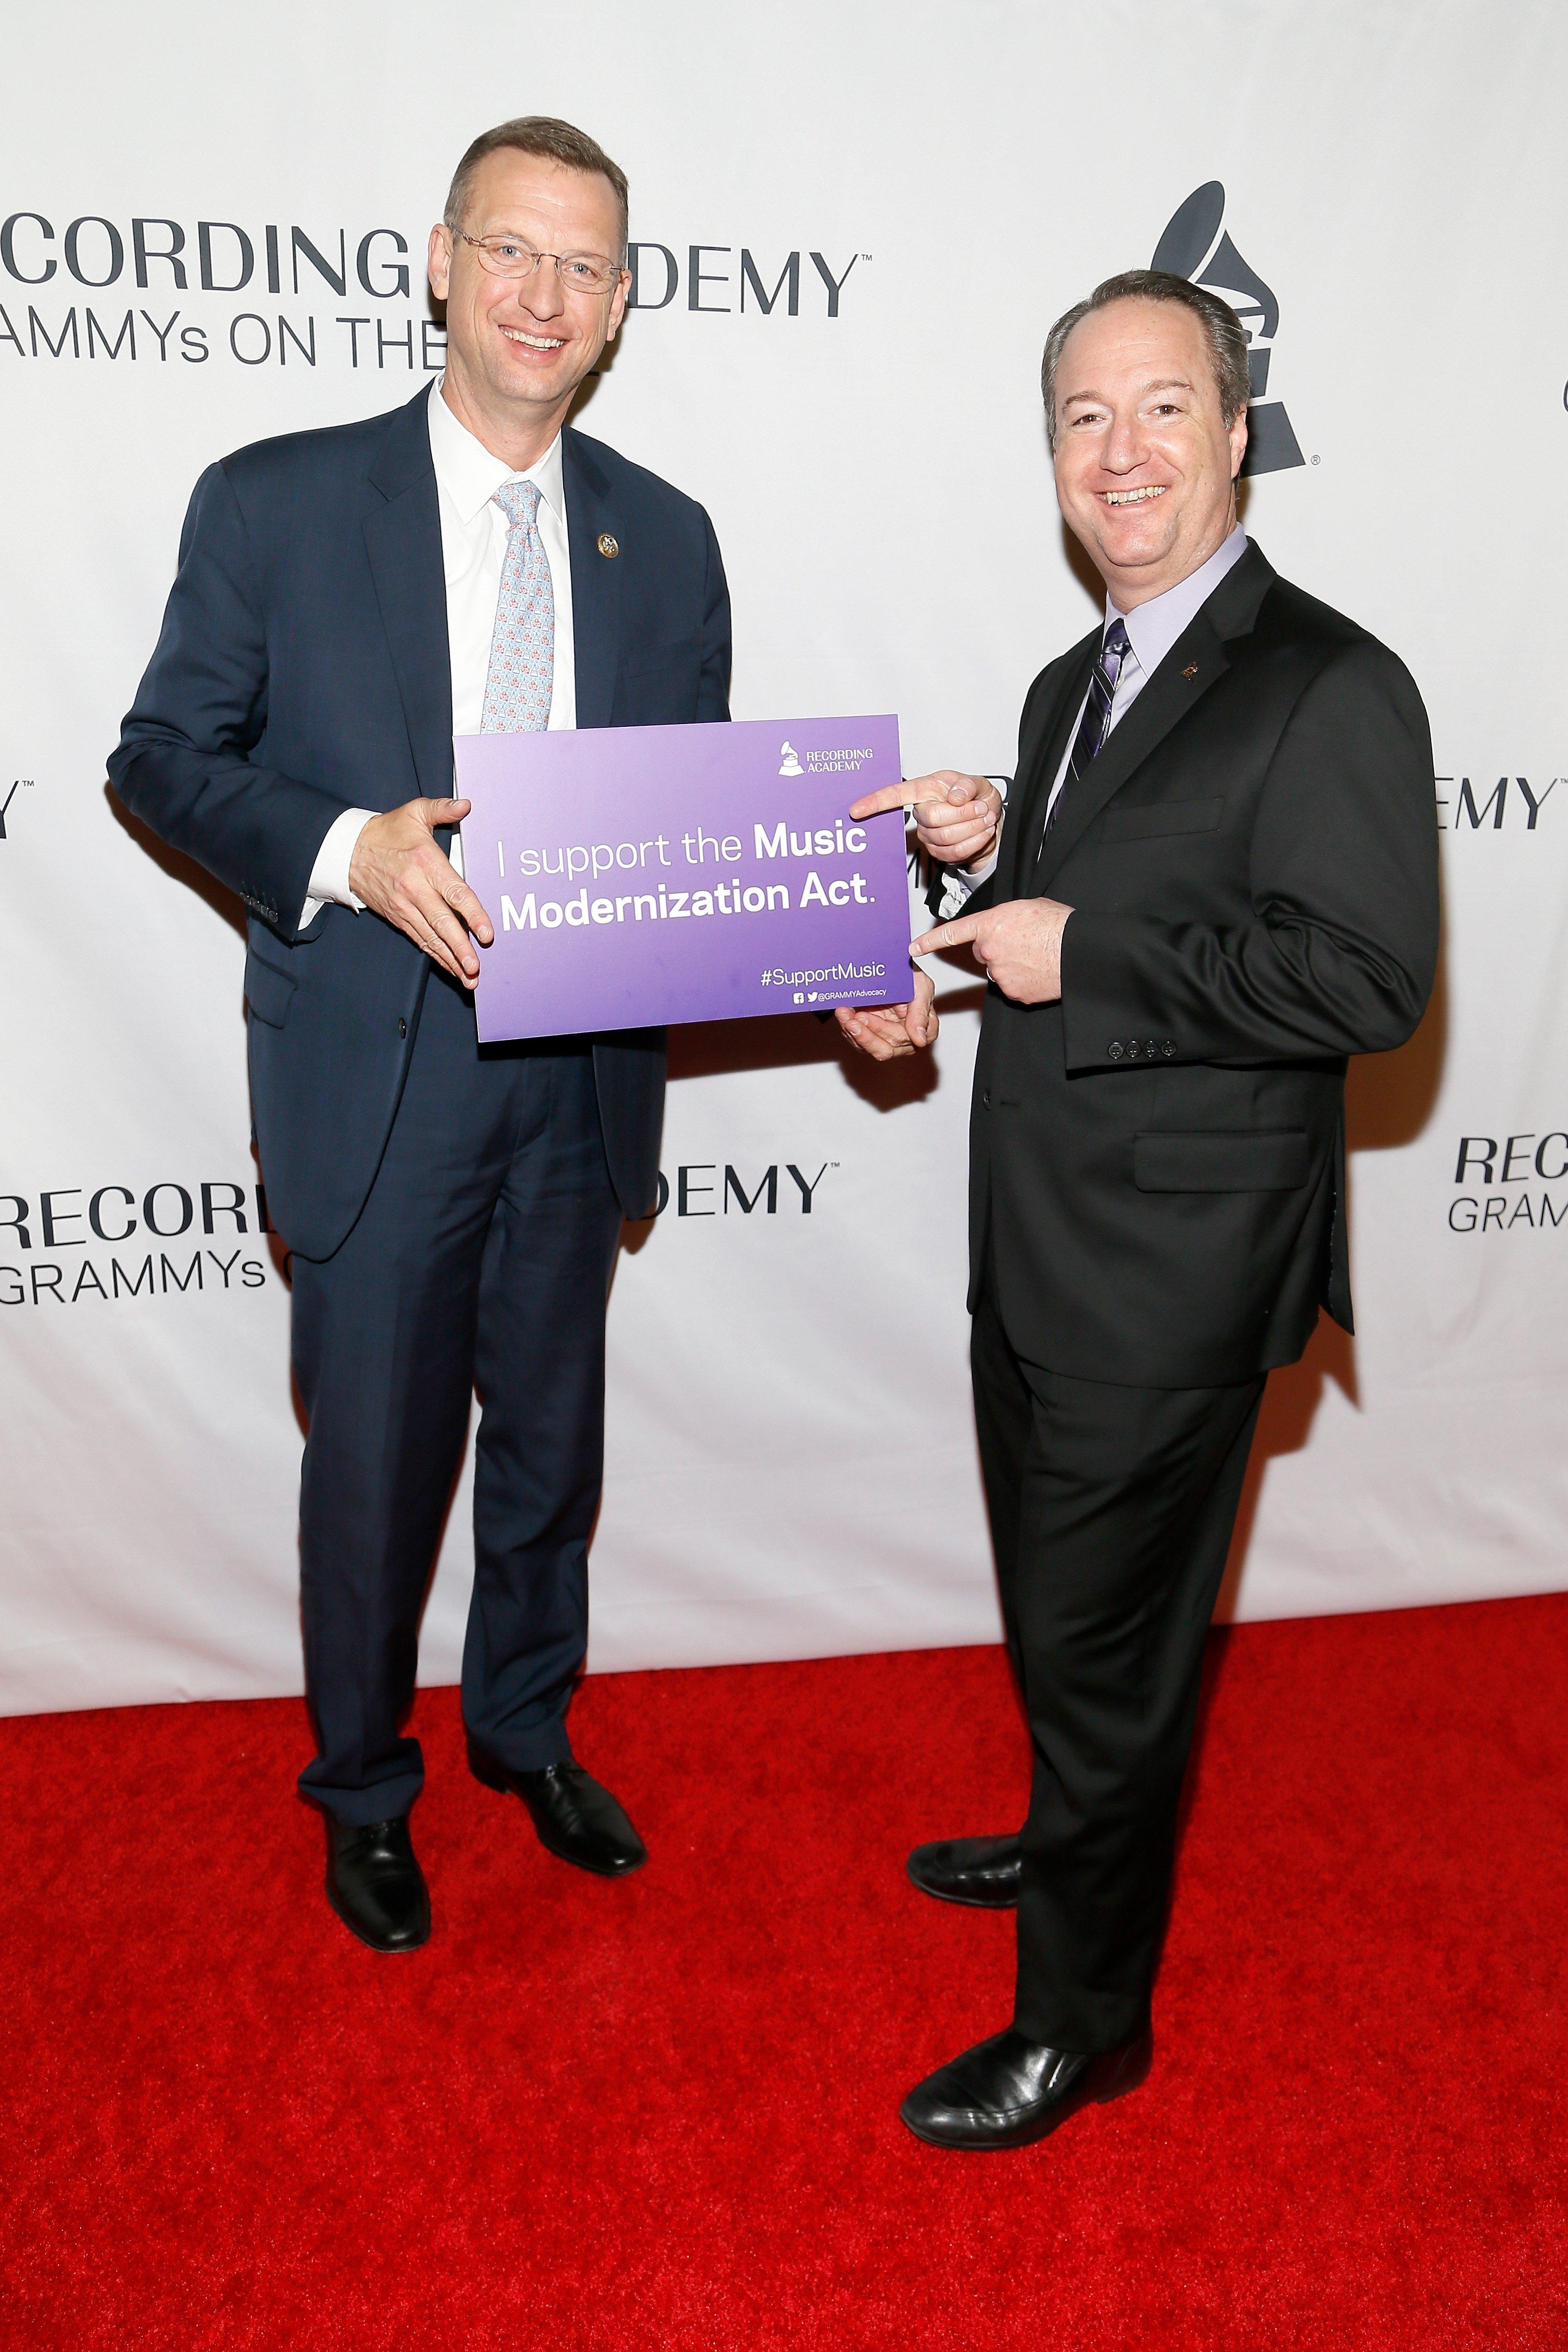 Rep. Doug Collins and Daryl Friedman at the 2018 GRAMMYs on the Hill Awards